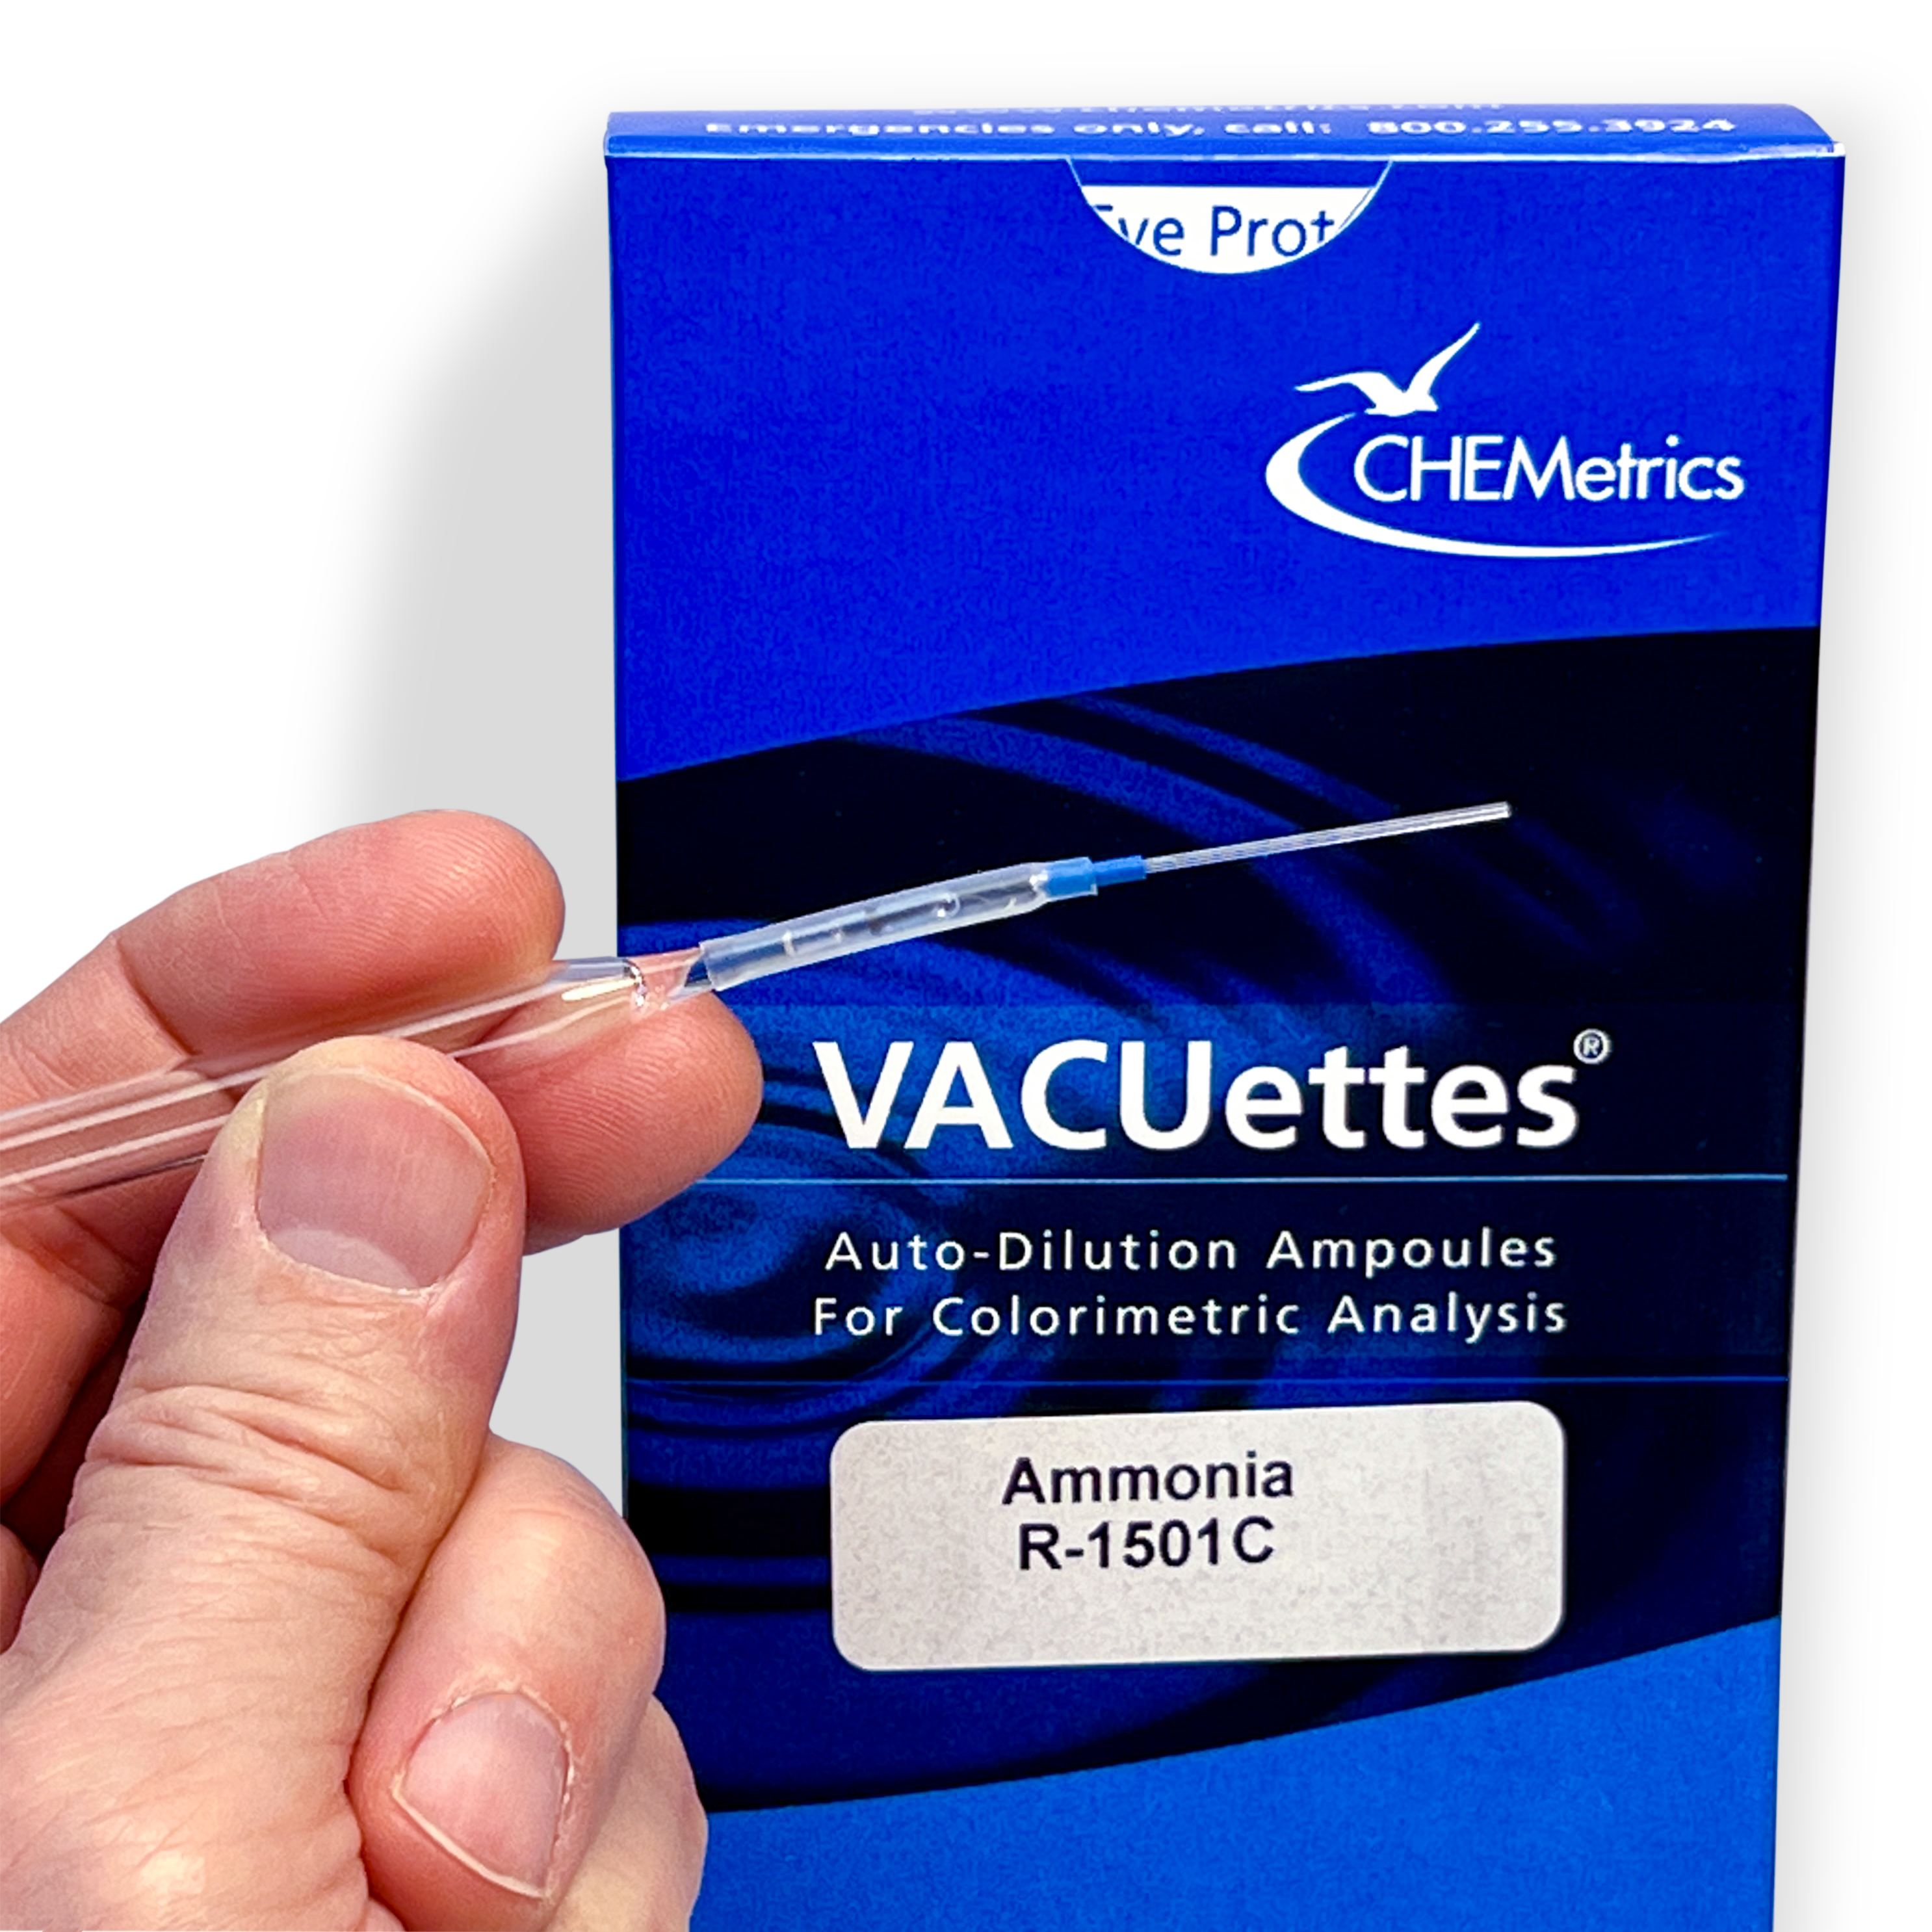 A hand holding A VACUettes ampoule with an R-1510C Ammonia box in the background.